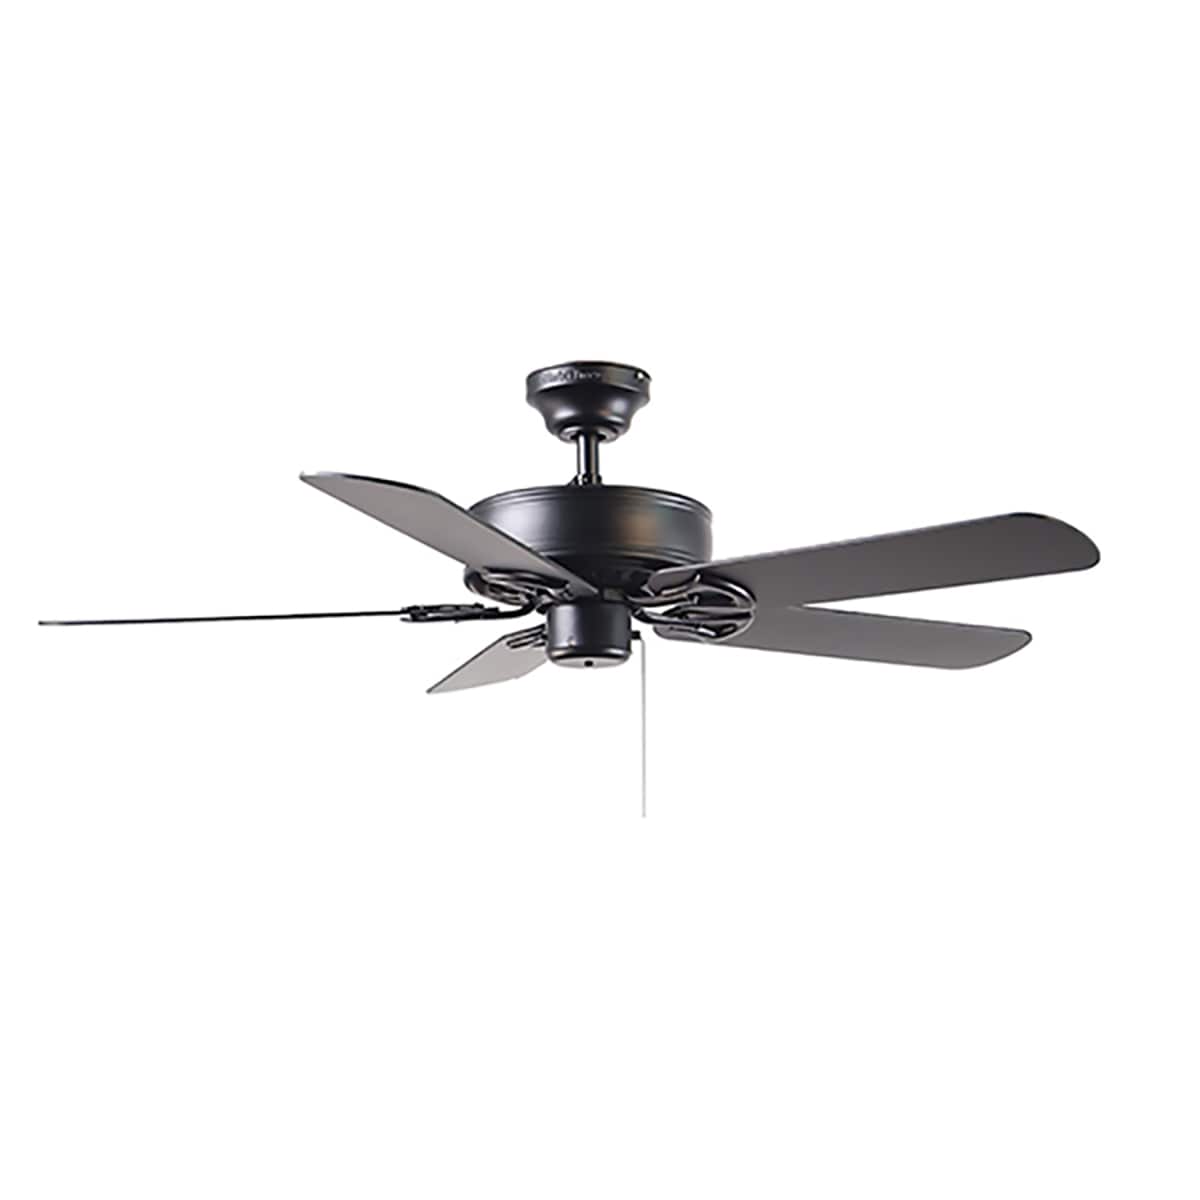 Harbor Breeze Thoroughbred 52 in Matte Black Ceiling Fan Replacements Parts